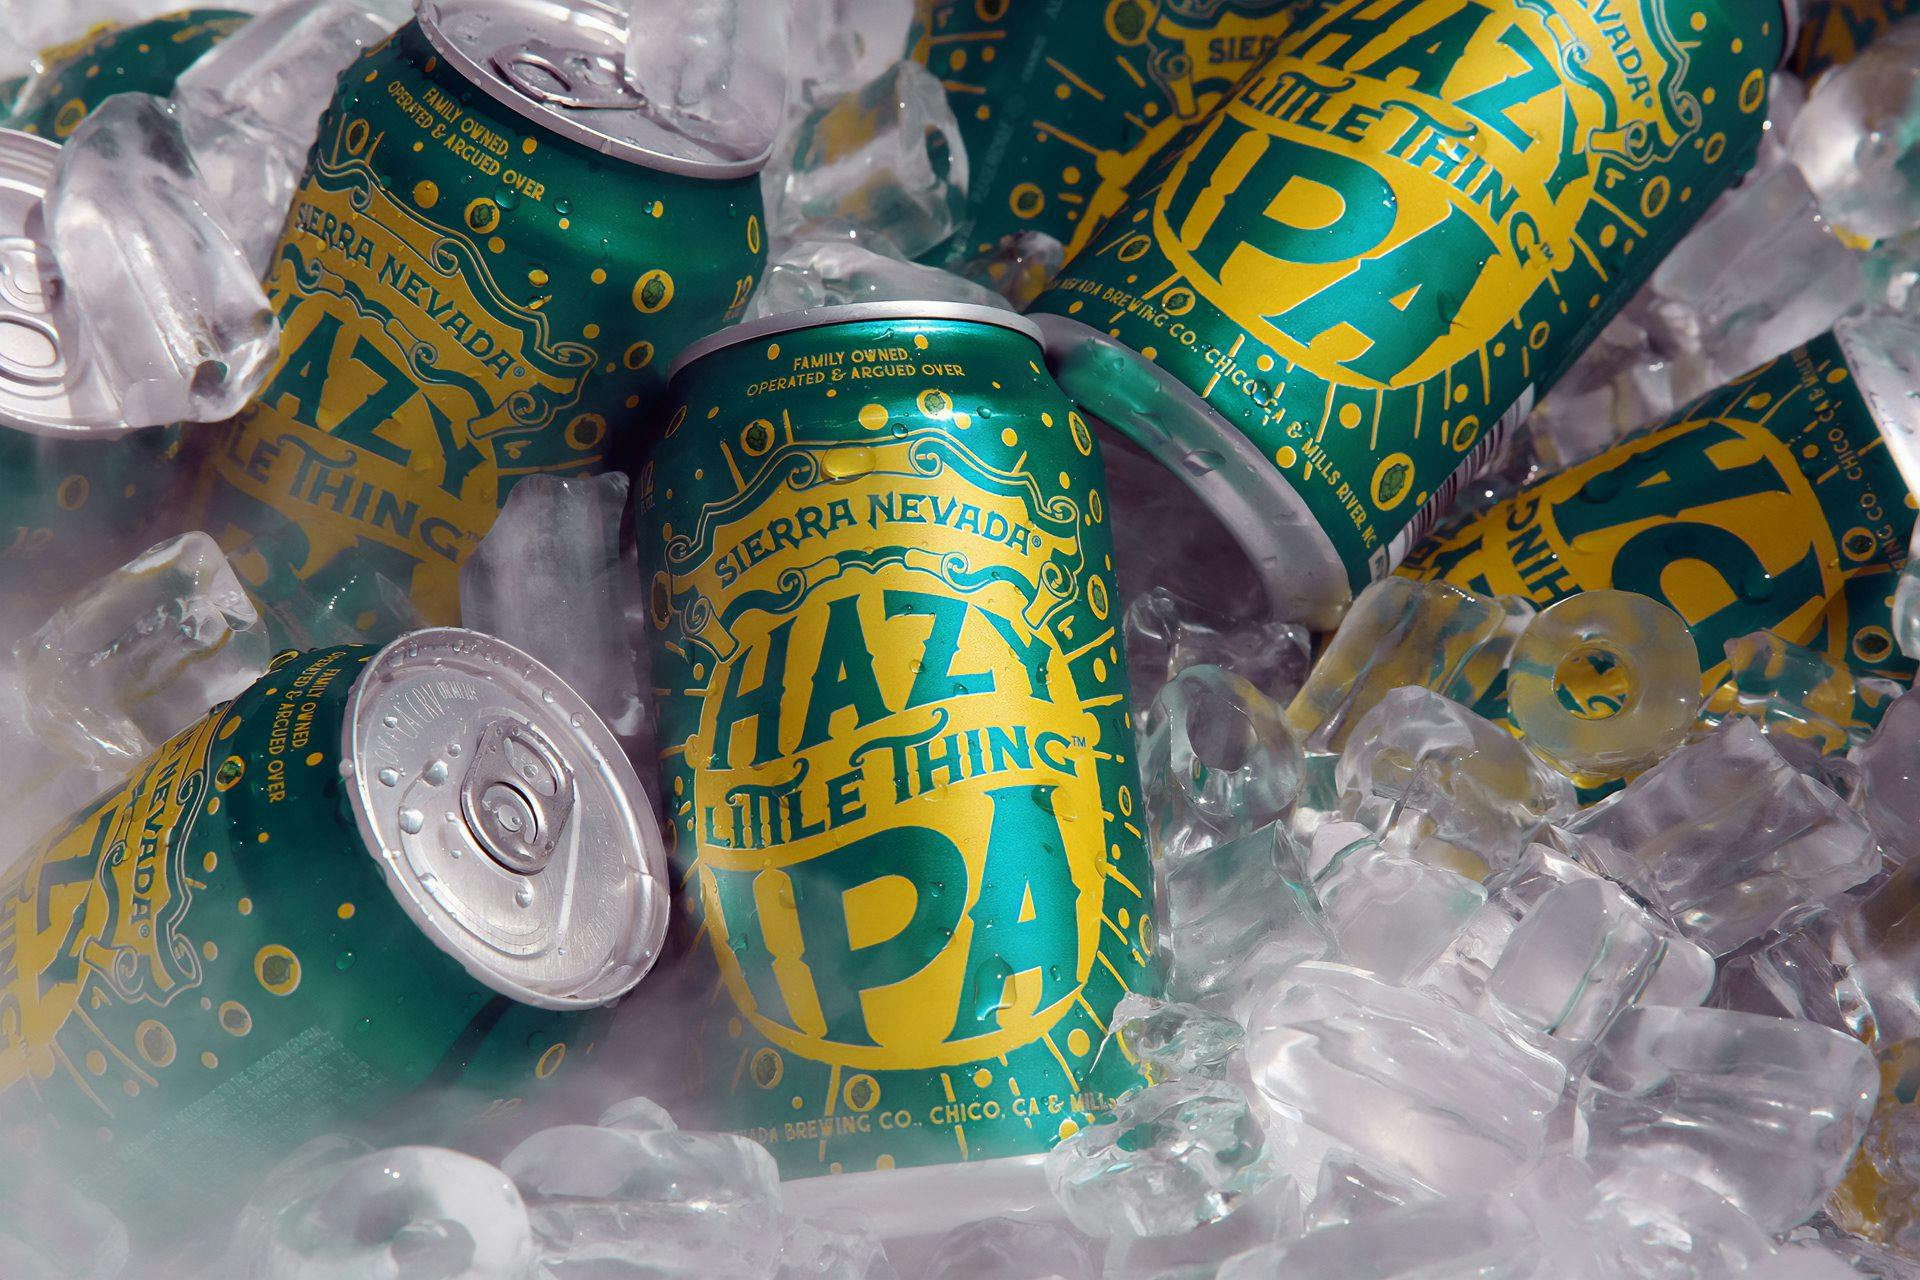 Hazy Little Thing beer cans on ice